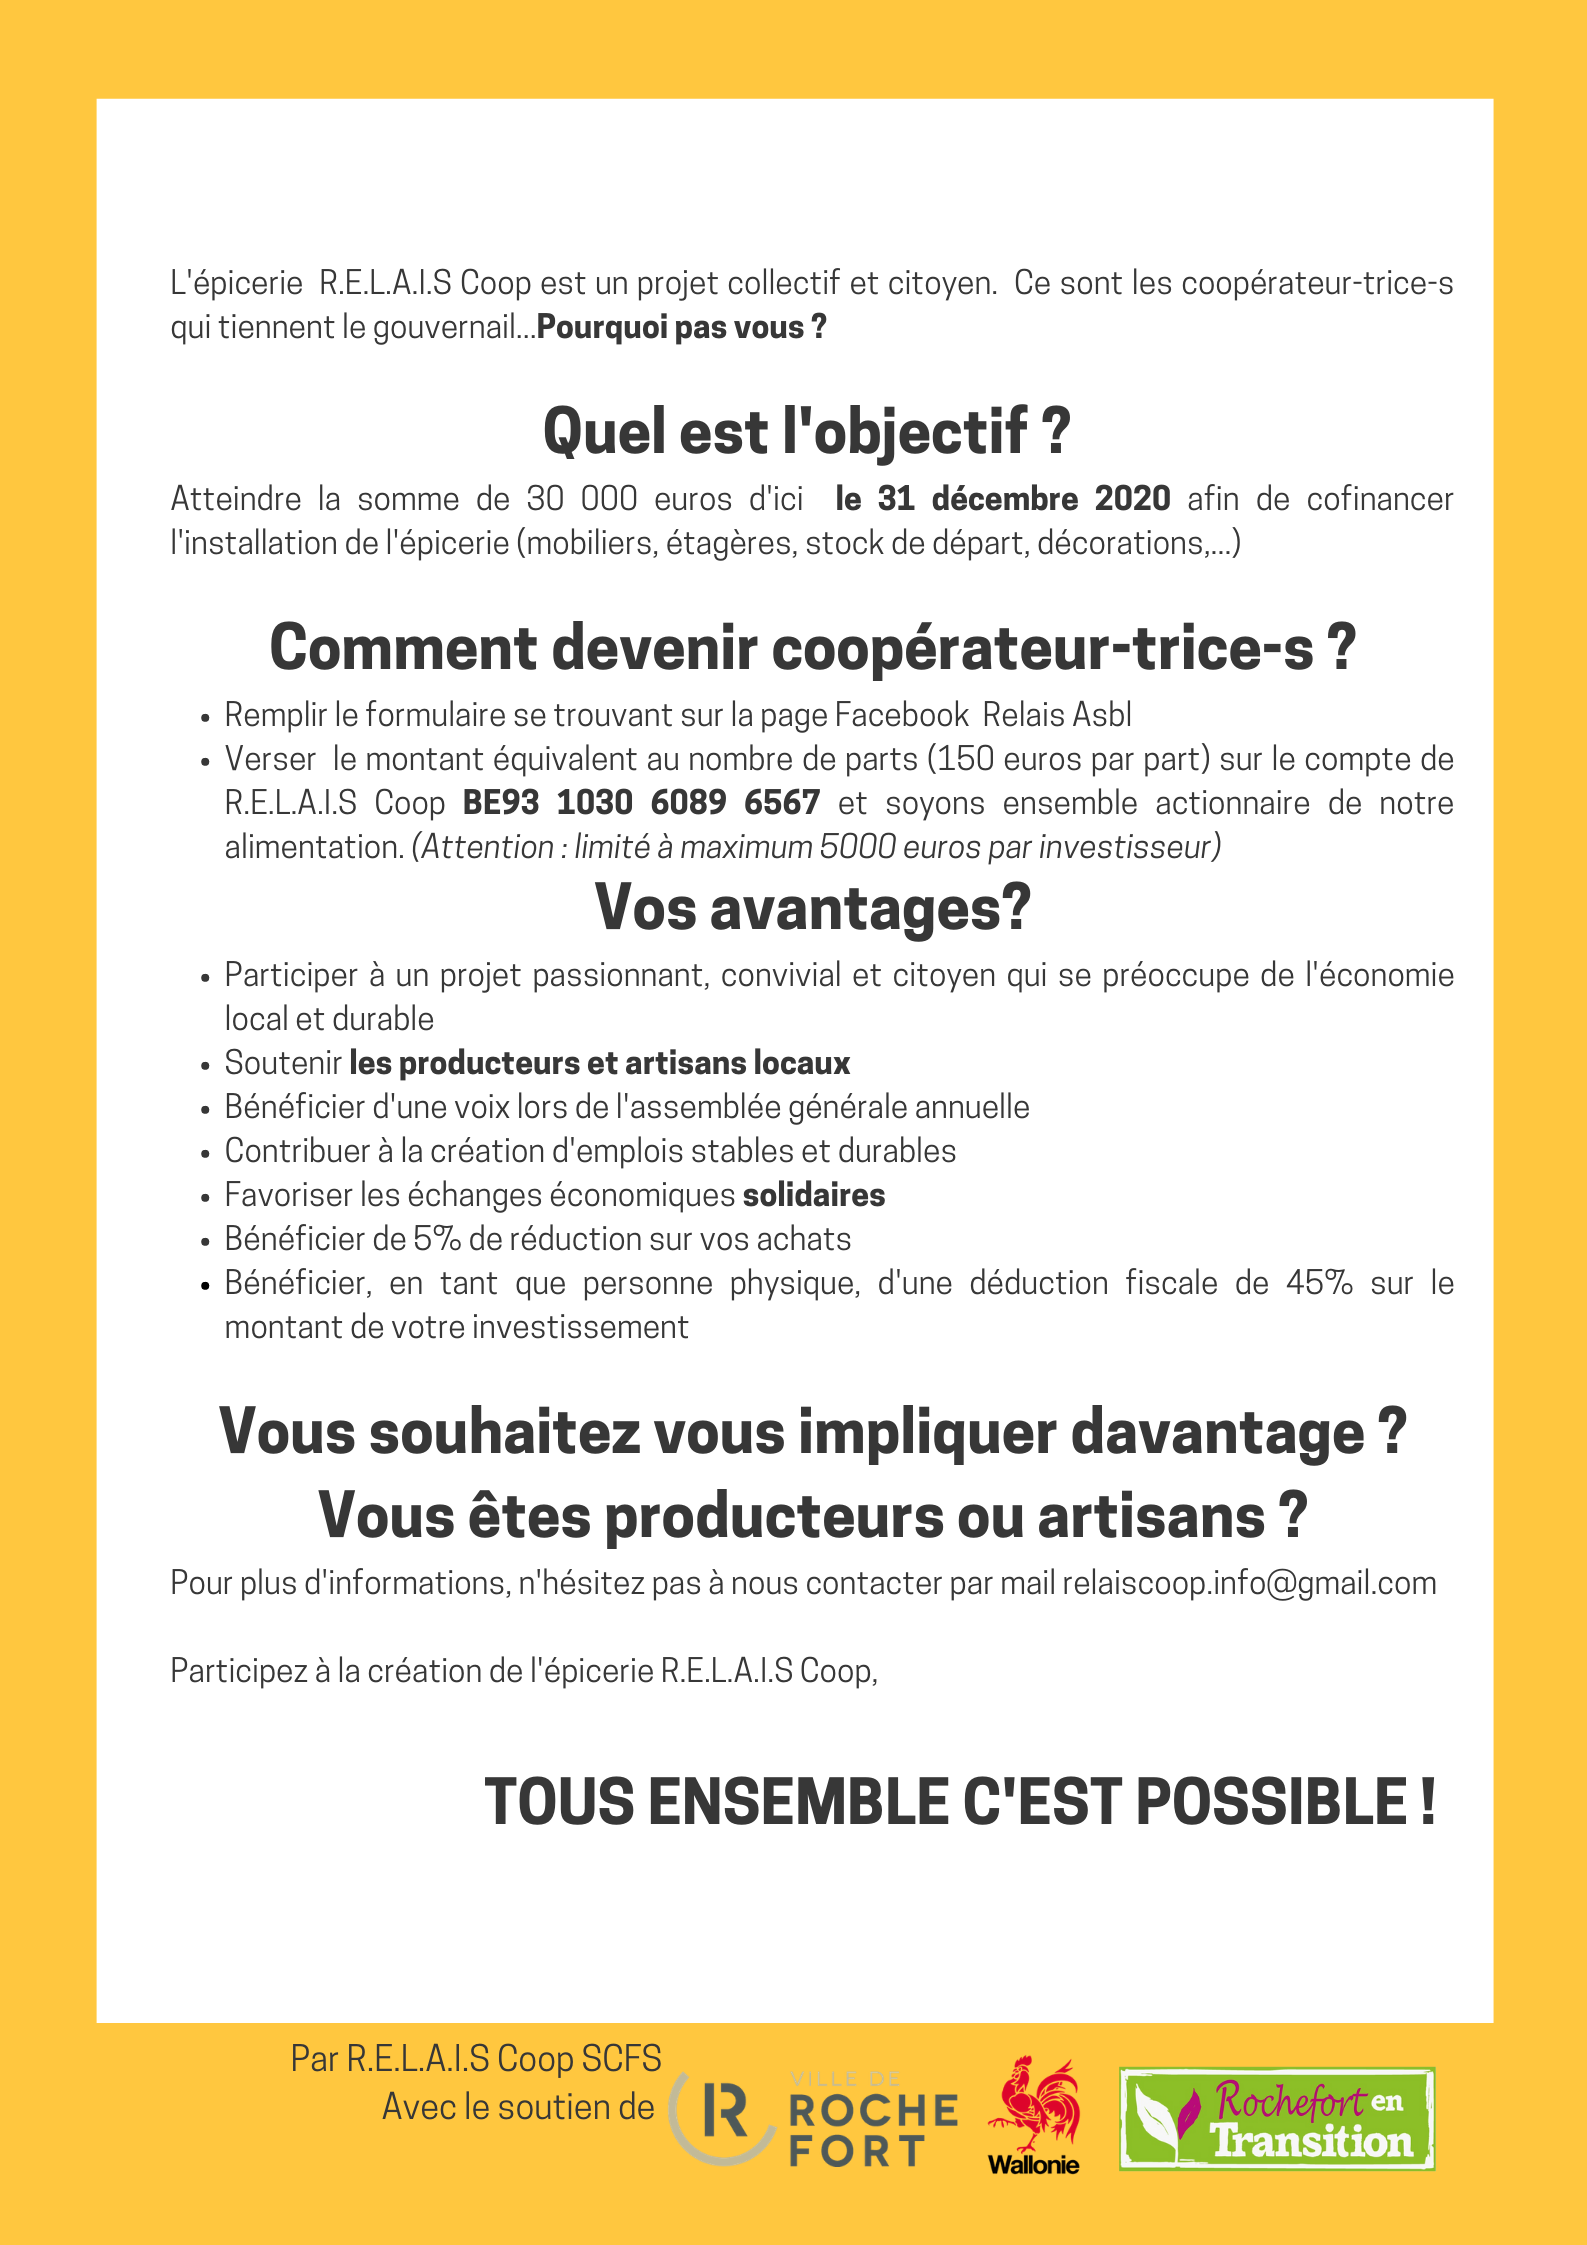 image Relais_coop_Affiche2.png (0.5MB)